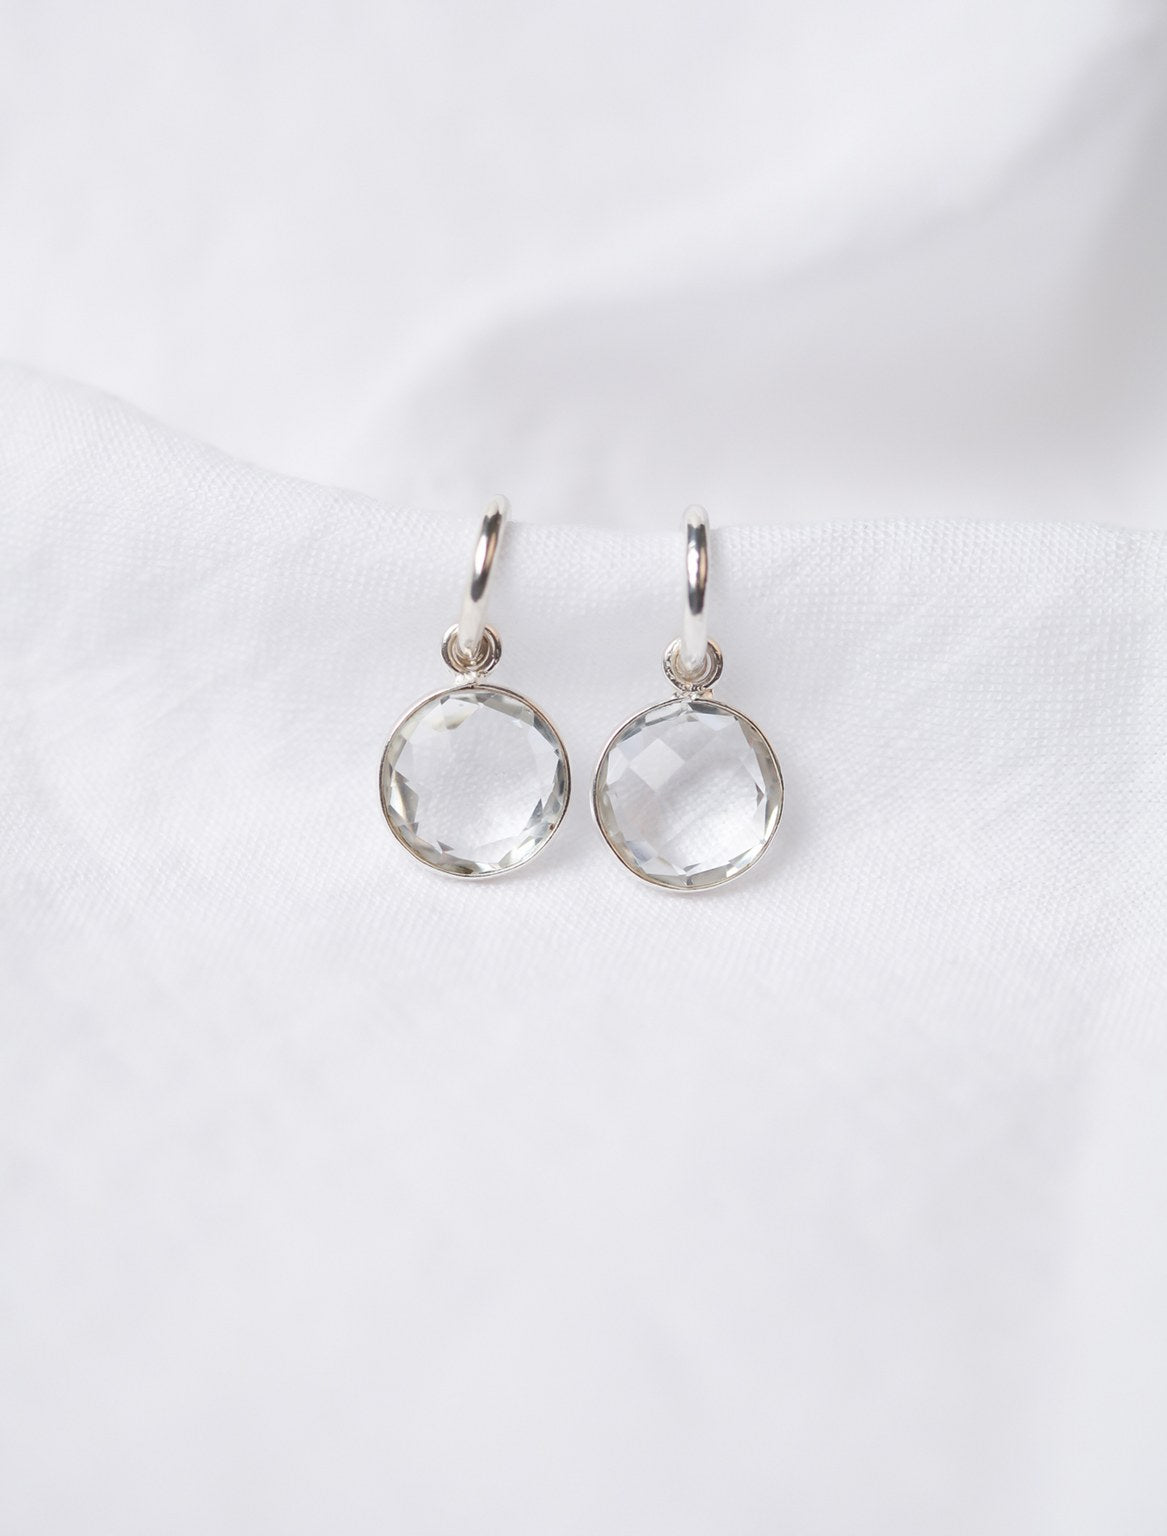 LARGE HOOP EARRINGS SILVER AND CLEAR QUARTZ